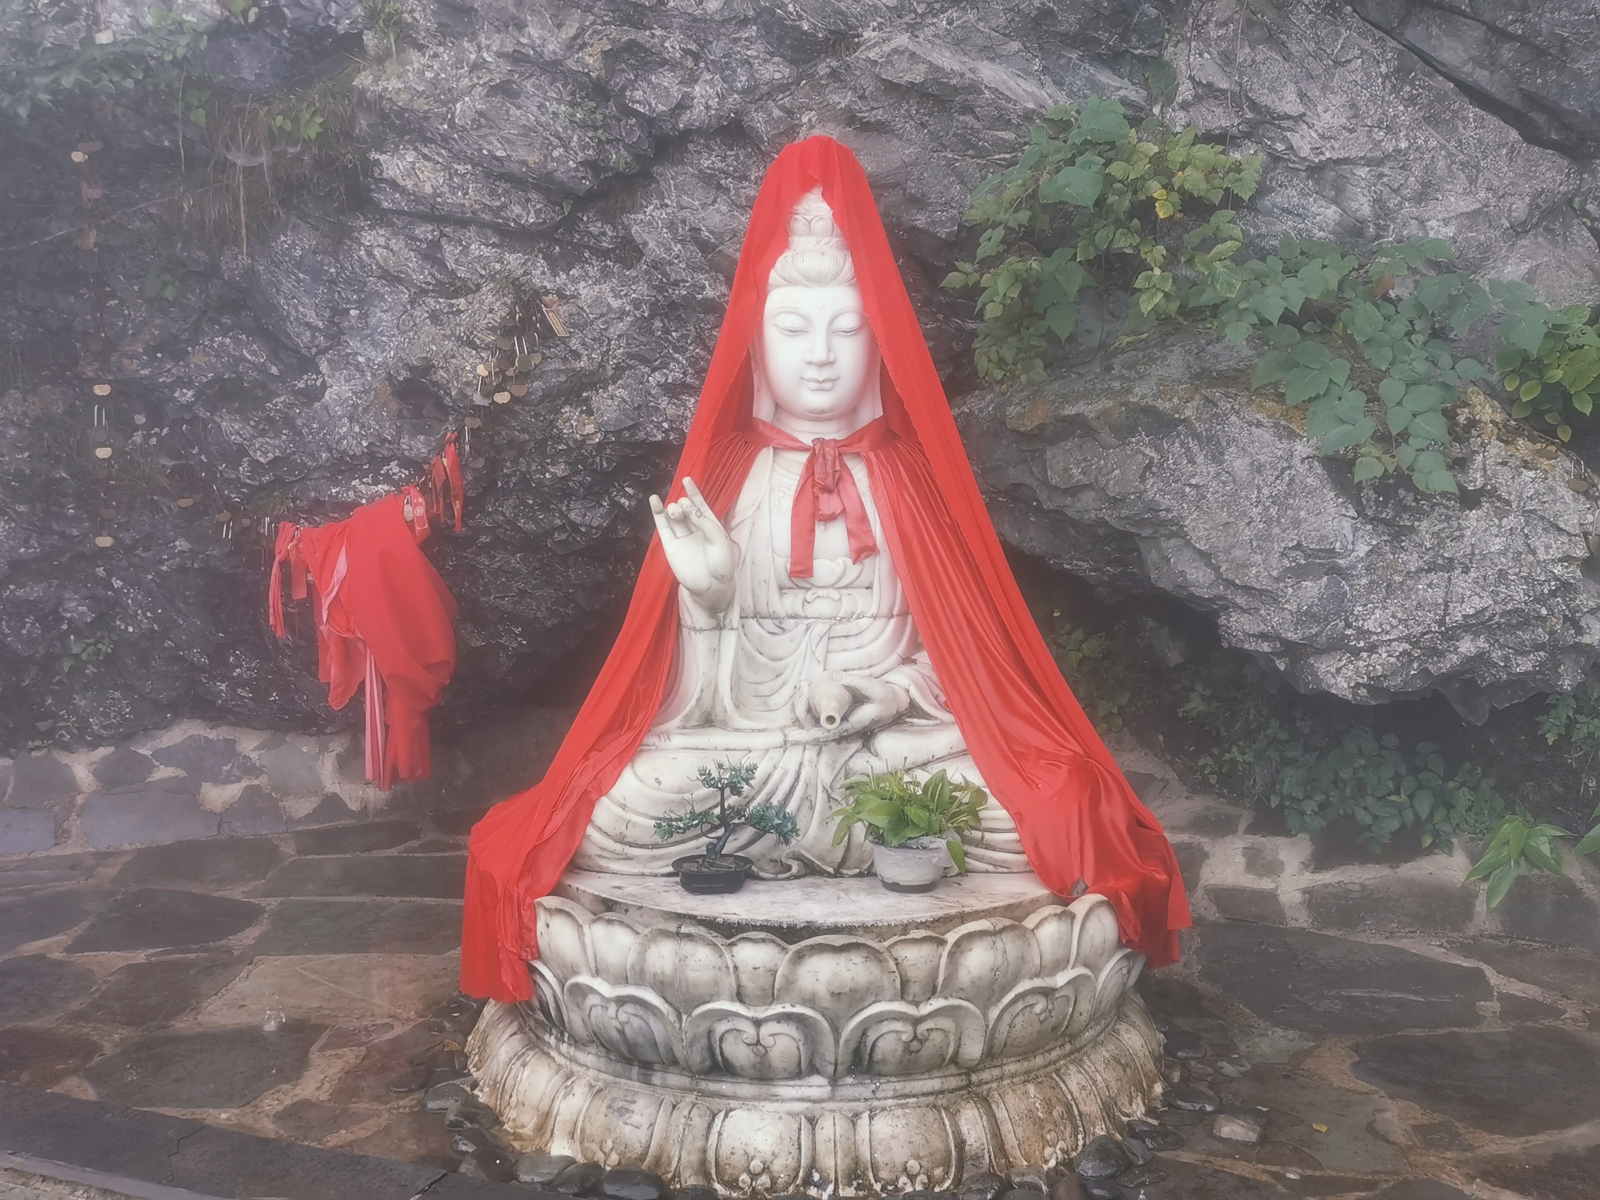 A statue of Avalokitesvara Bodhisattva, or Guanyin, stands on Mount Fanjing, in Tongren, southwest China's Guizhou Province, on August 25, 2023. /CGTN